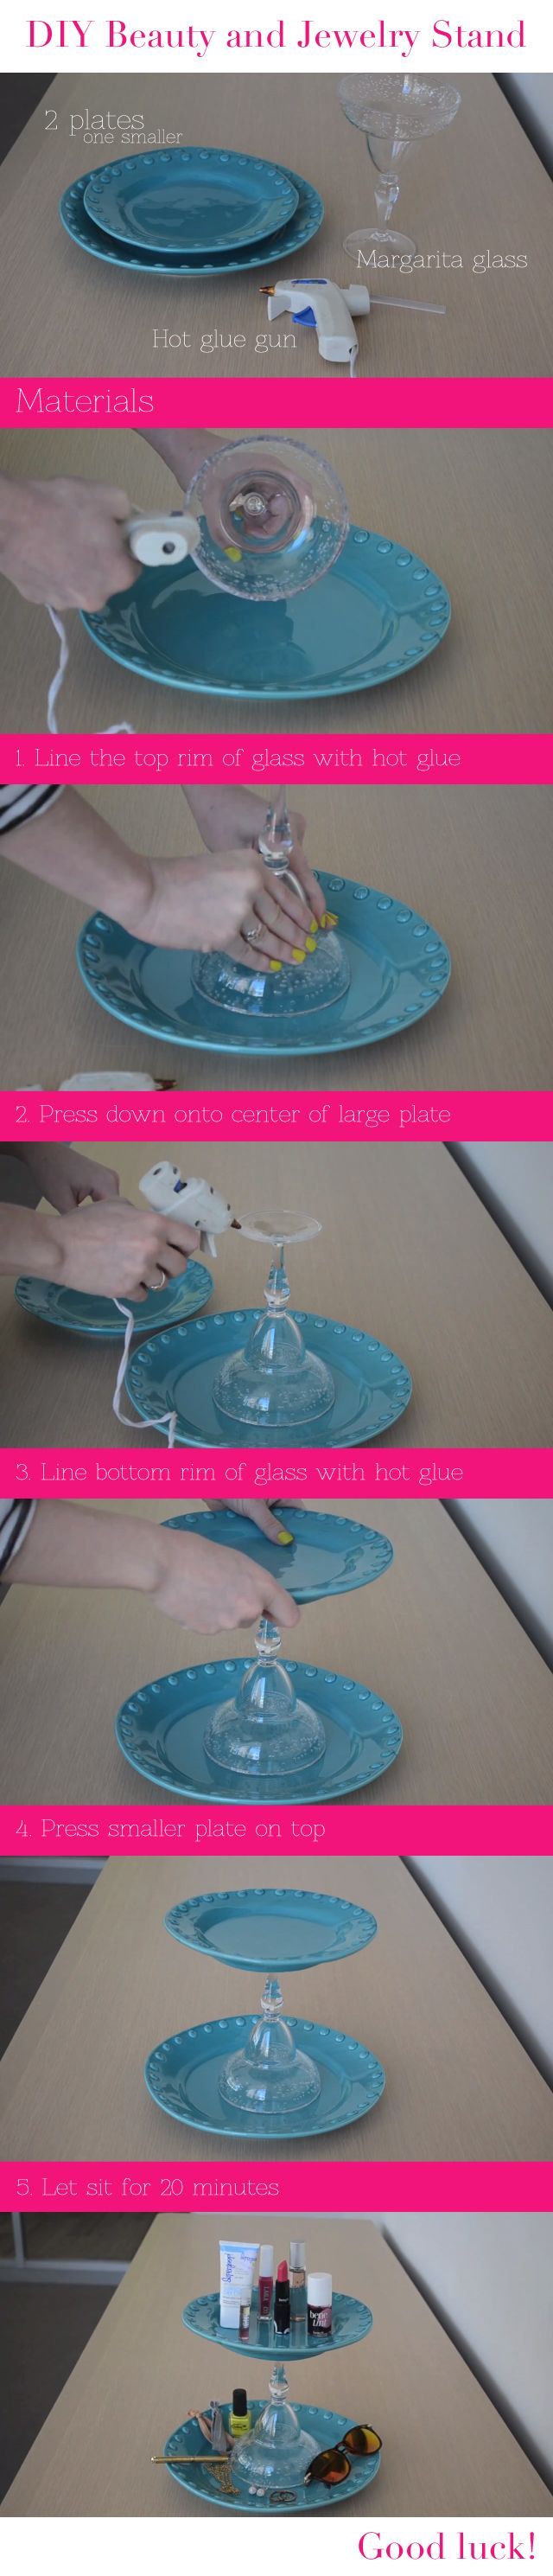 How to create your own makeup or jewelry stand using plates and a margarita glass!